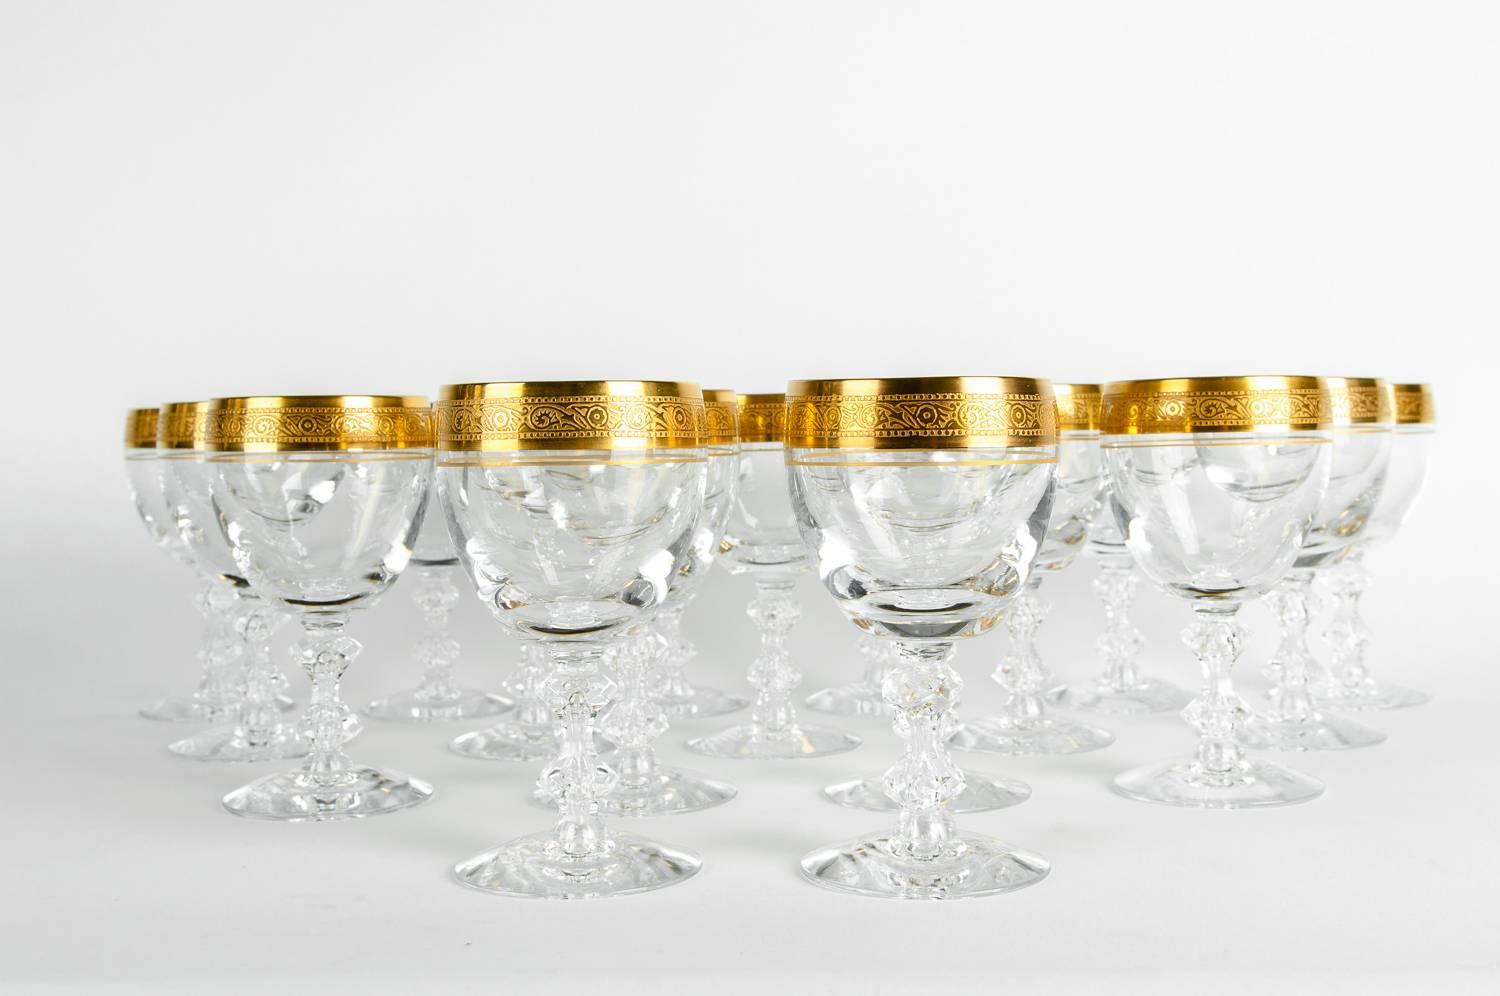 Vintage cut crystal with 24-karat gold design top wine/water glassware set of 12 pieces. Each glass is in excellent condition. Each glass measure 5 inches high X 2.5 inches top diameter.